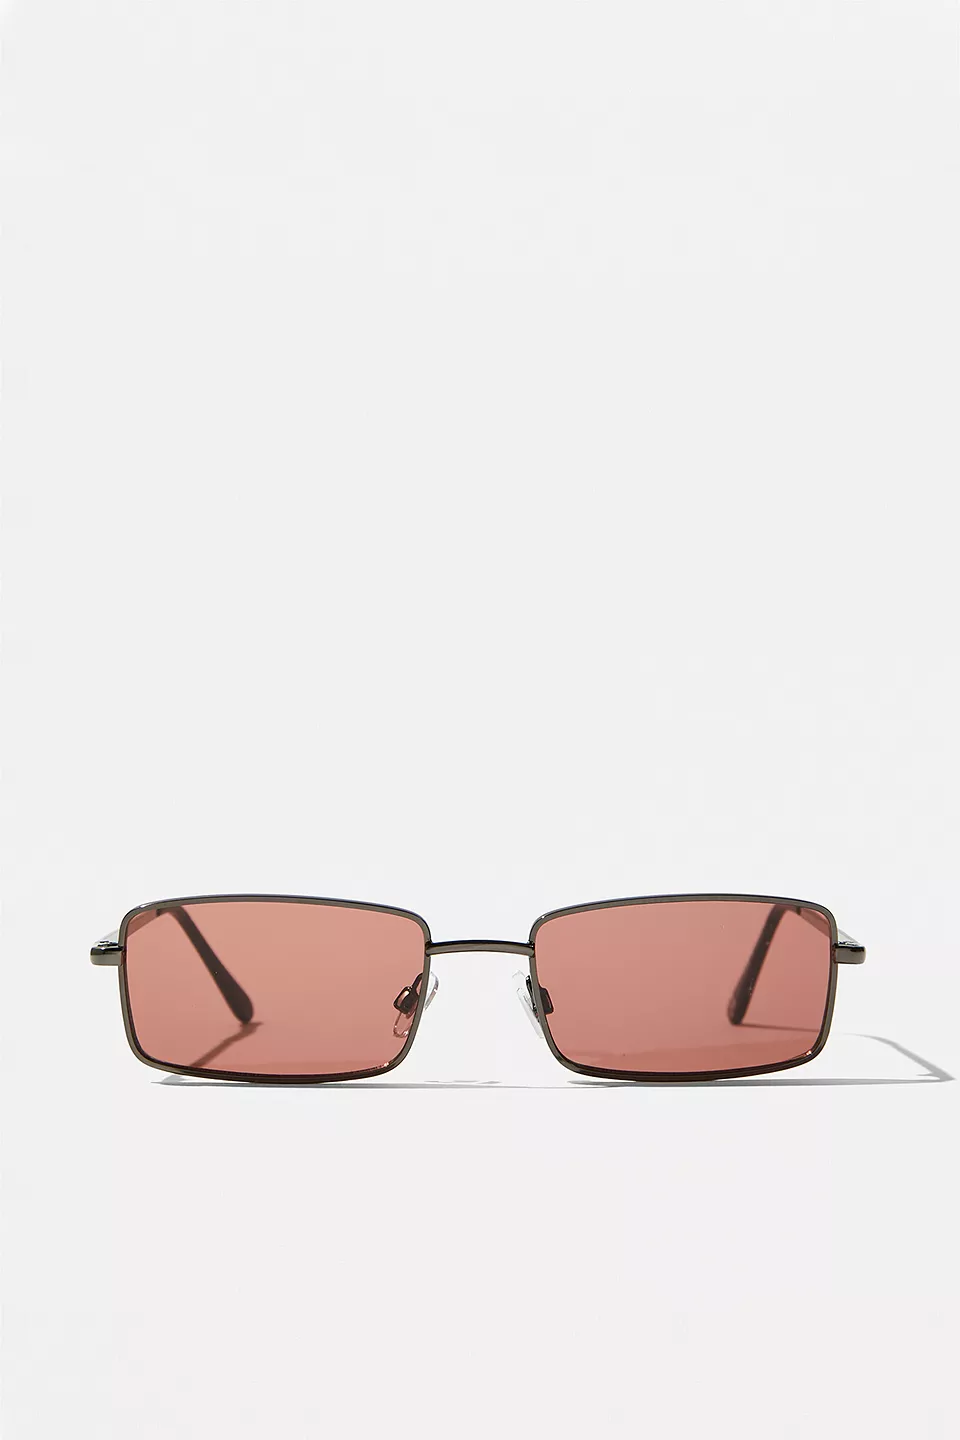 urbanoutfitters.com | Uo – Sonnenbrille „Palmer“